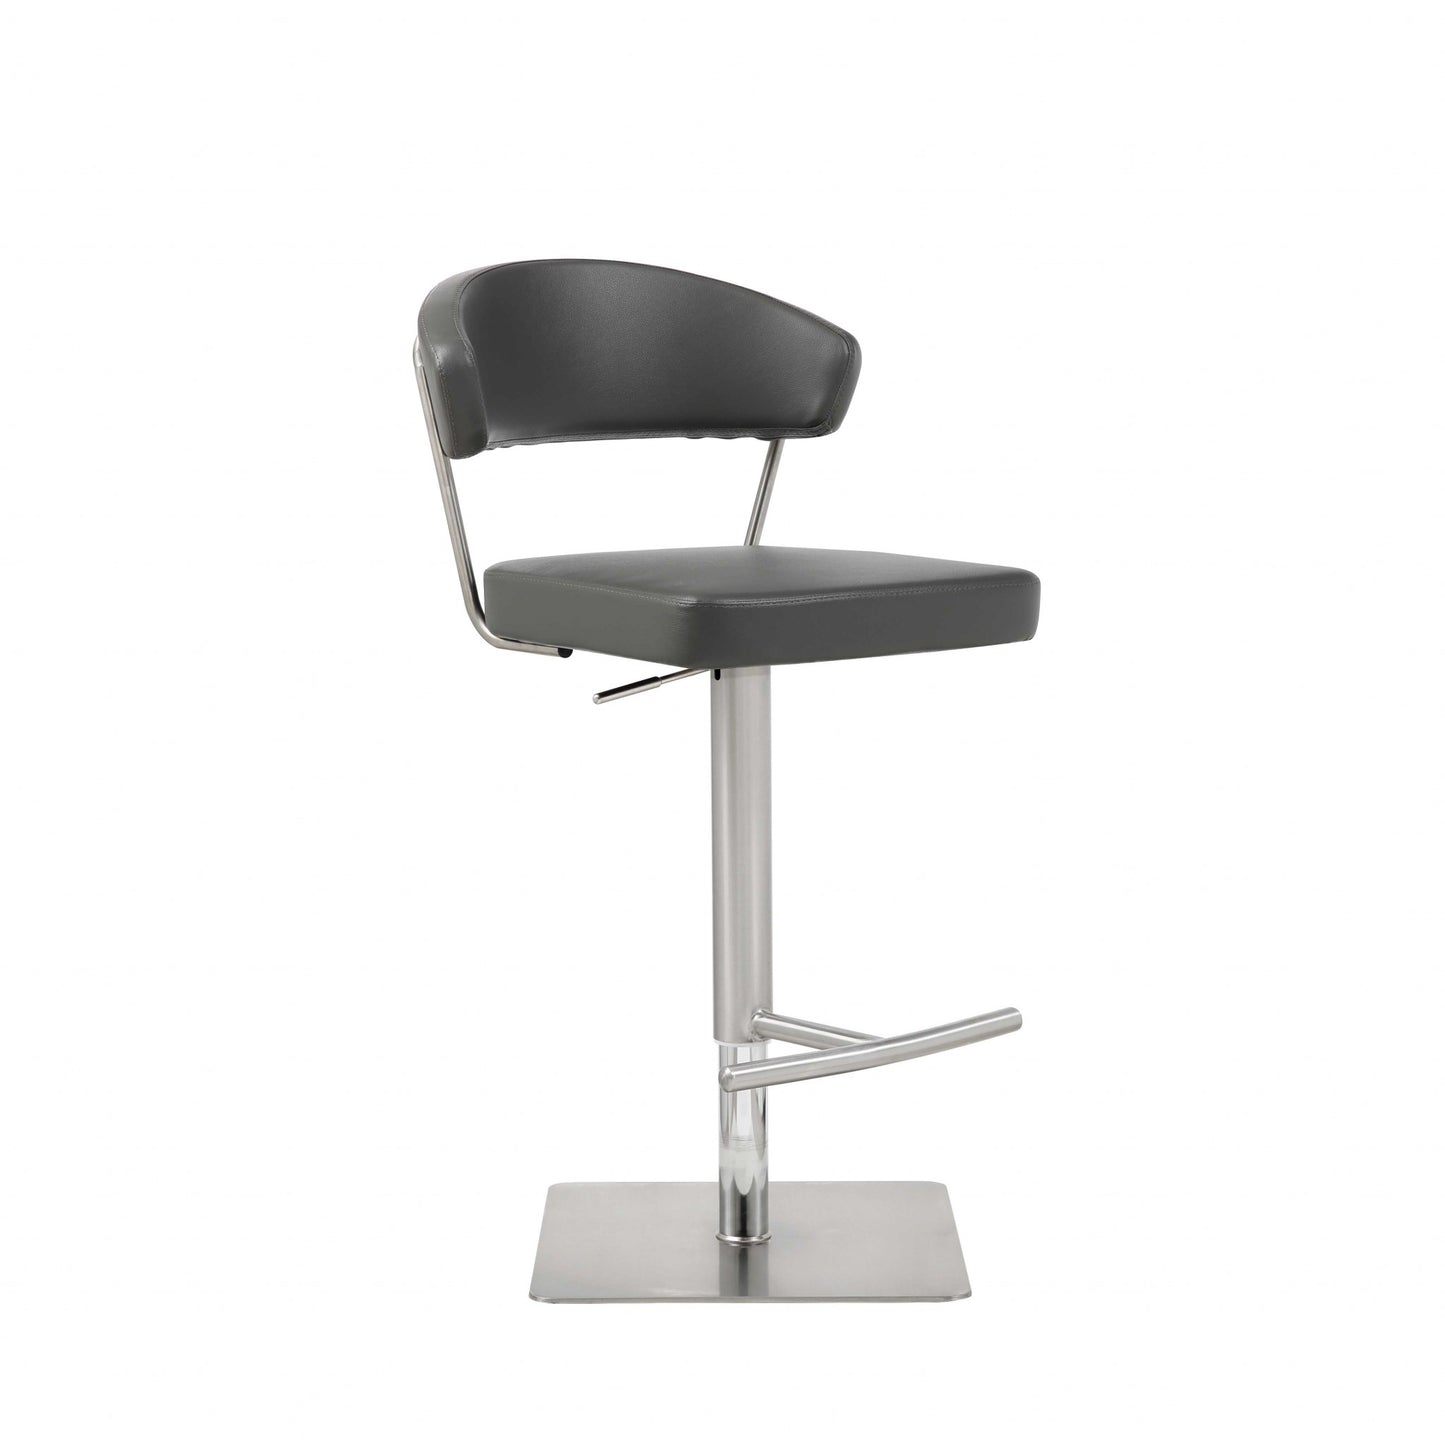 20 " Black And Silver Stainless Steel Bar Chair